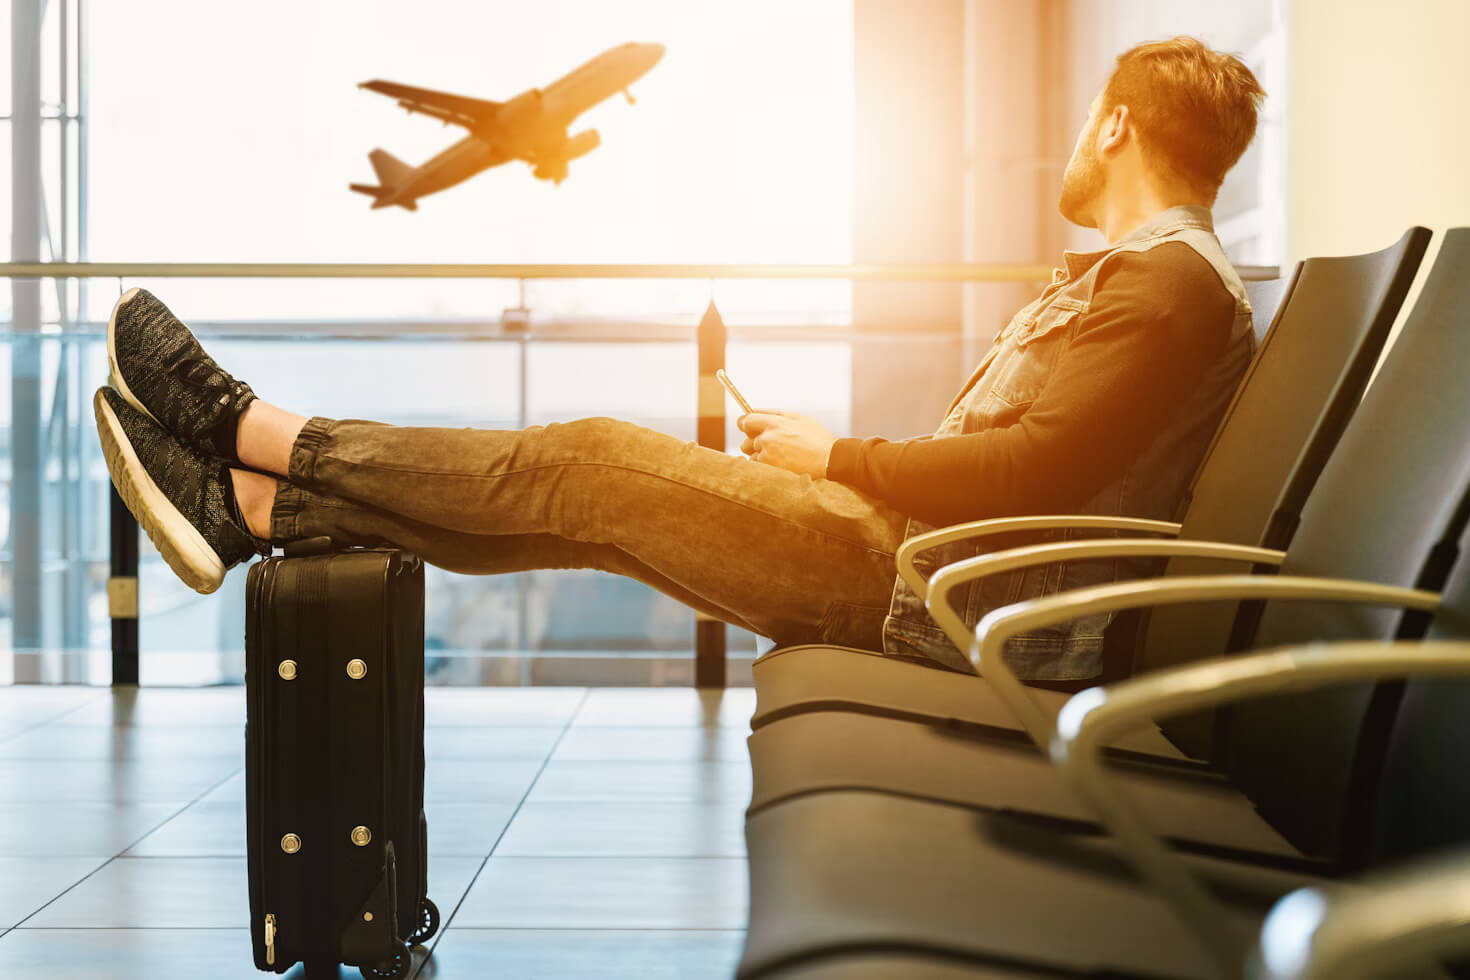 A man sitting in airport and thinking about the best solo travel destinations